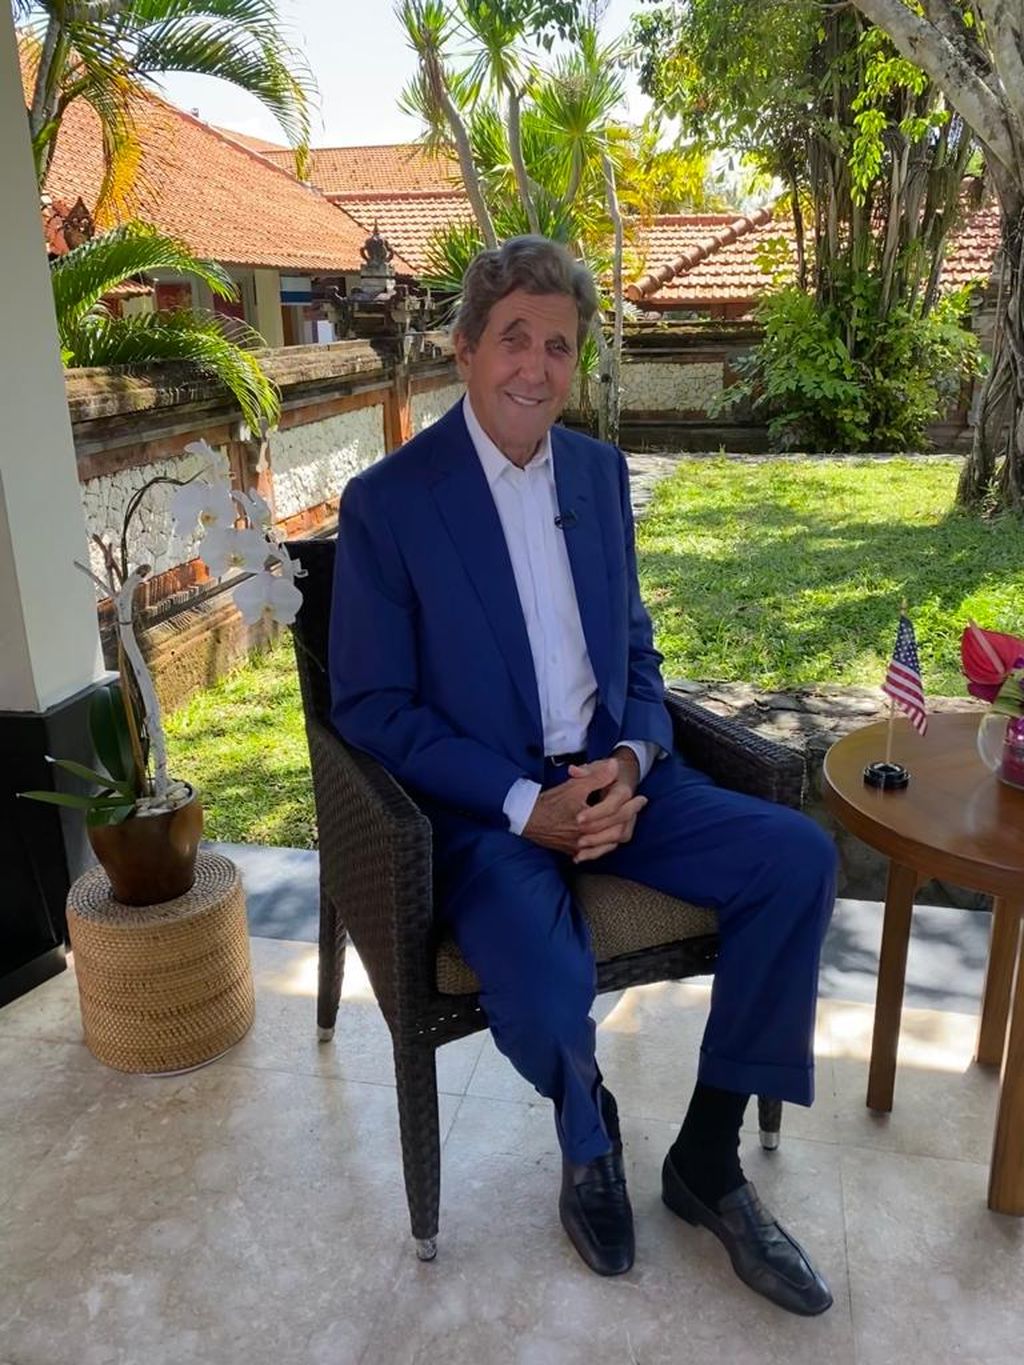 The United States President's Special Envoy for Climate Affairs, John Kerry, while in Nusa Dua, Bali, attended a meeting of the G20 environment ministers on Thursday (1/9/2022).